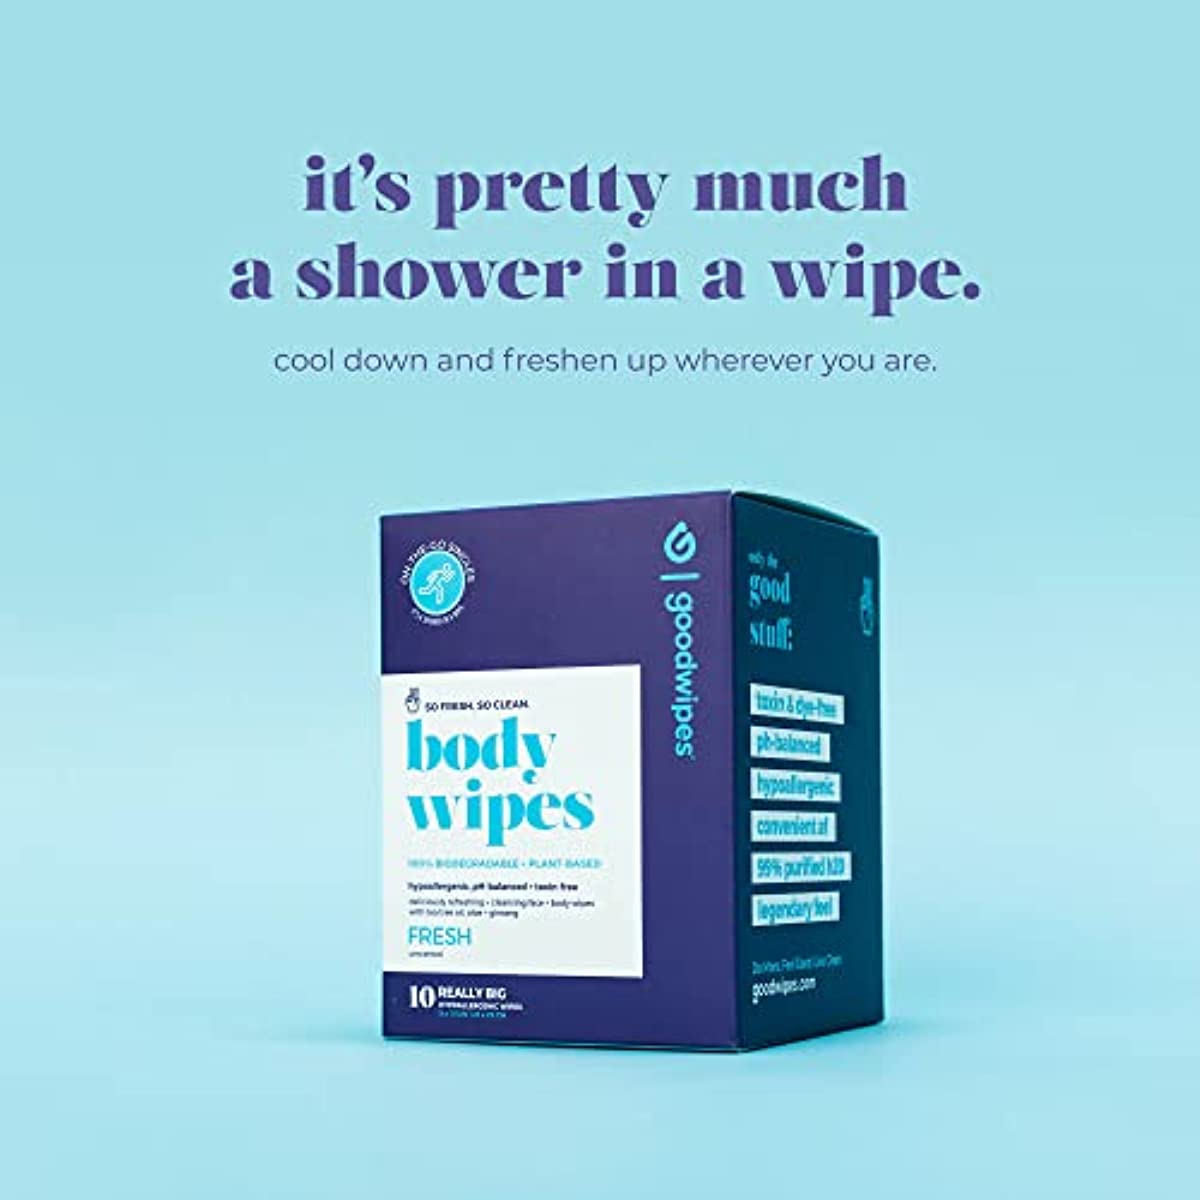 Goodwipes Really Big Body Wipes, Fresh Scent, Plant Based and Hypoallergenic, Wipe Away Sweat and Odor, for Face and Body, with Aloe and Ginseng (10 Count)